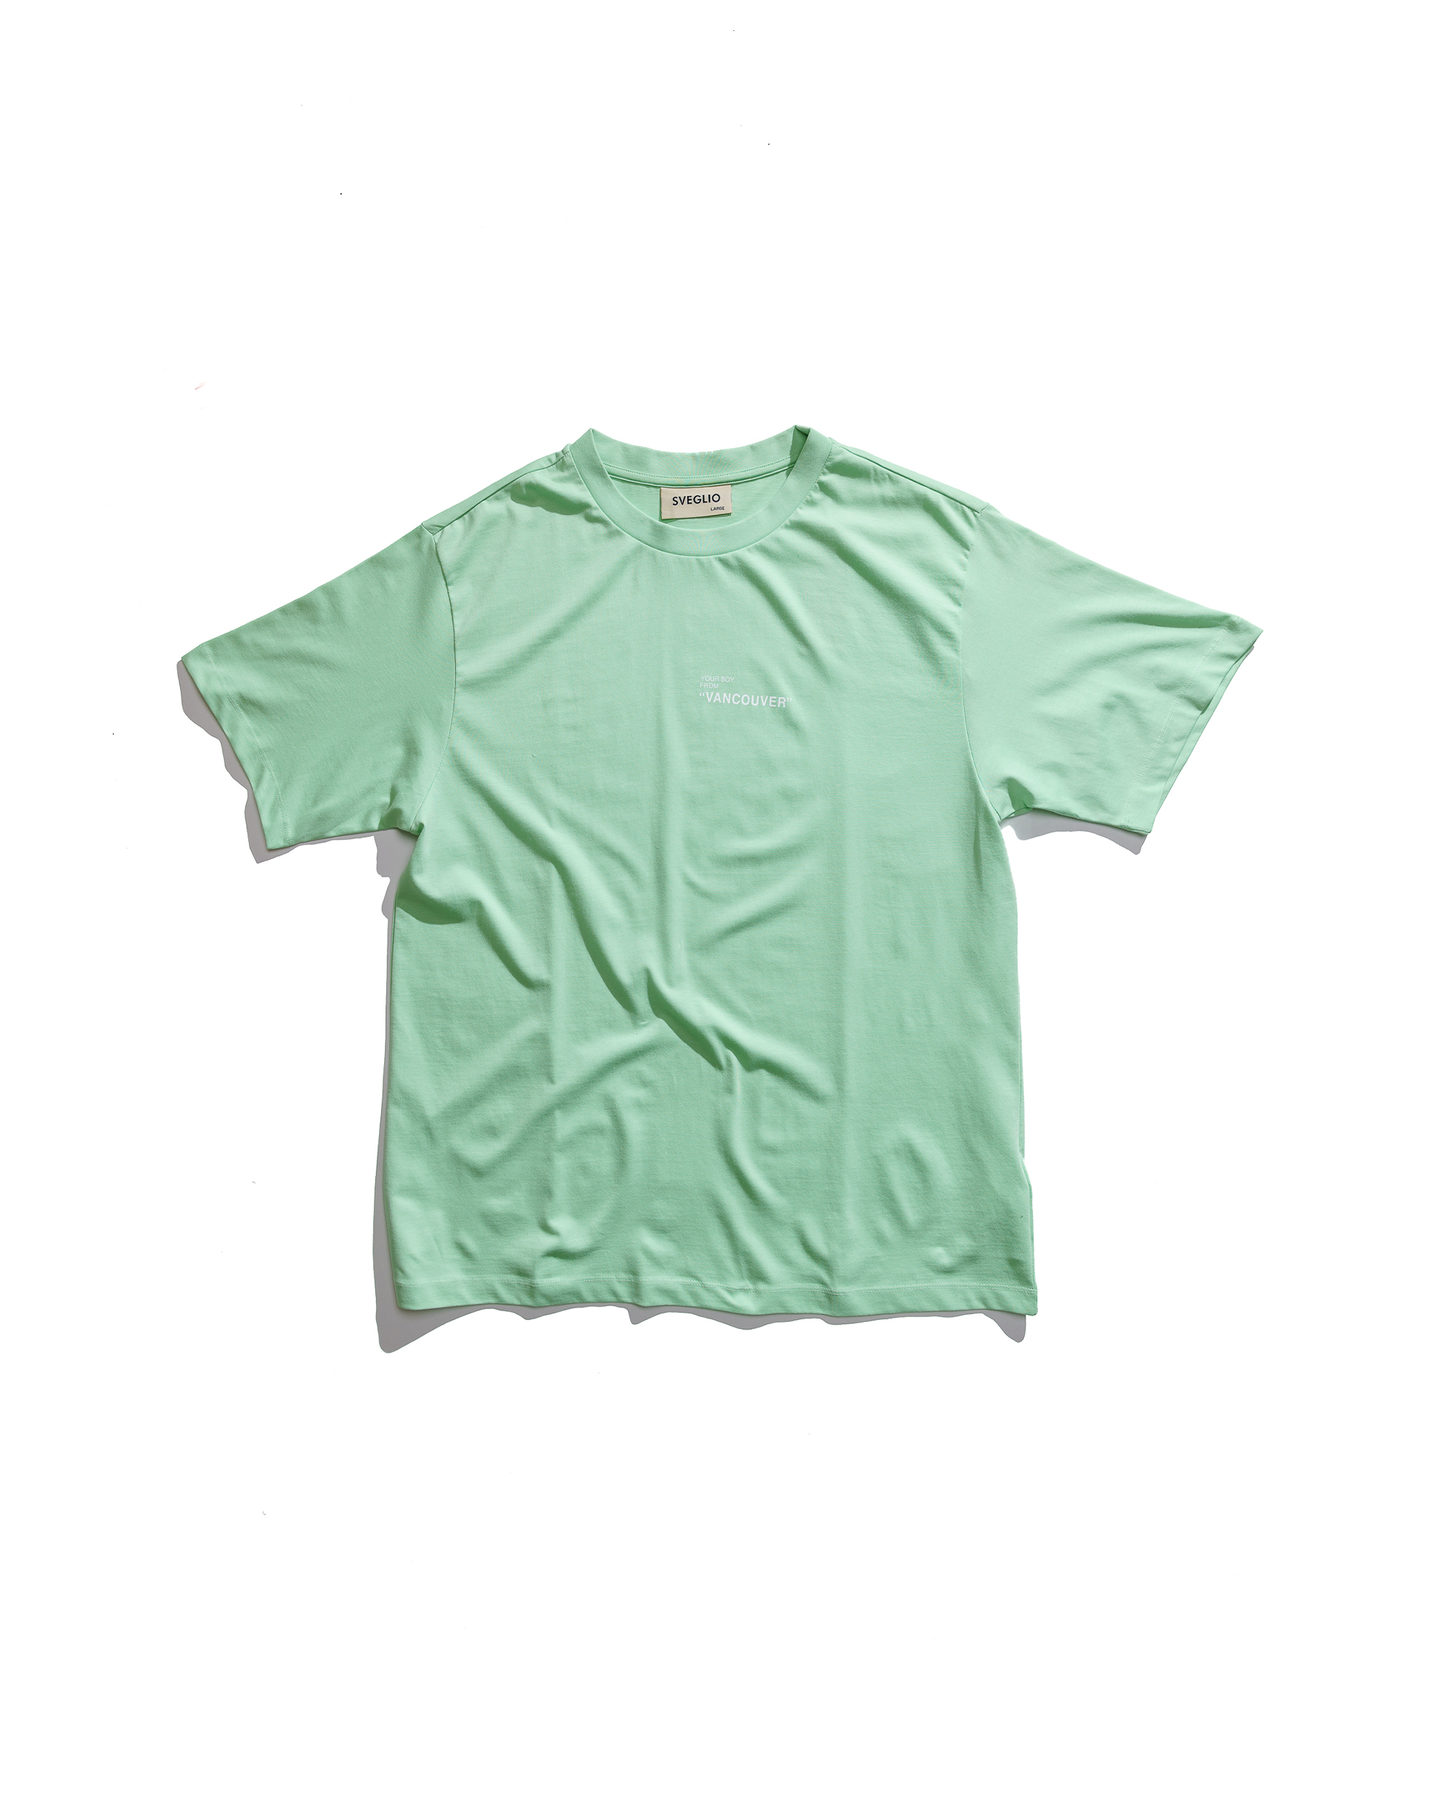 Your Boy from Vancouver T-shirt- Mint Green